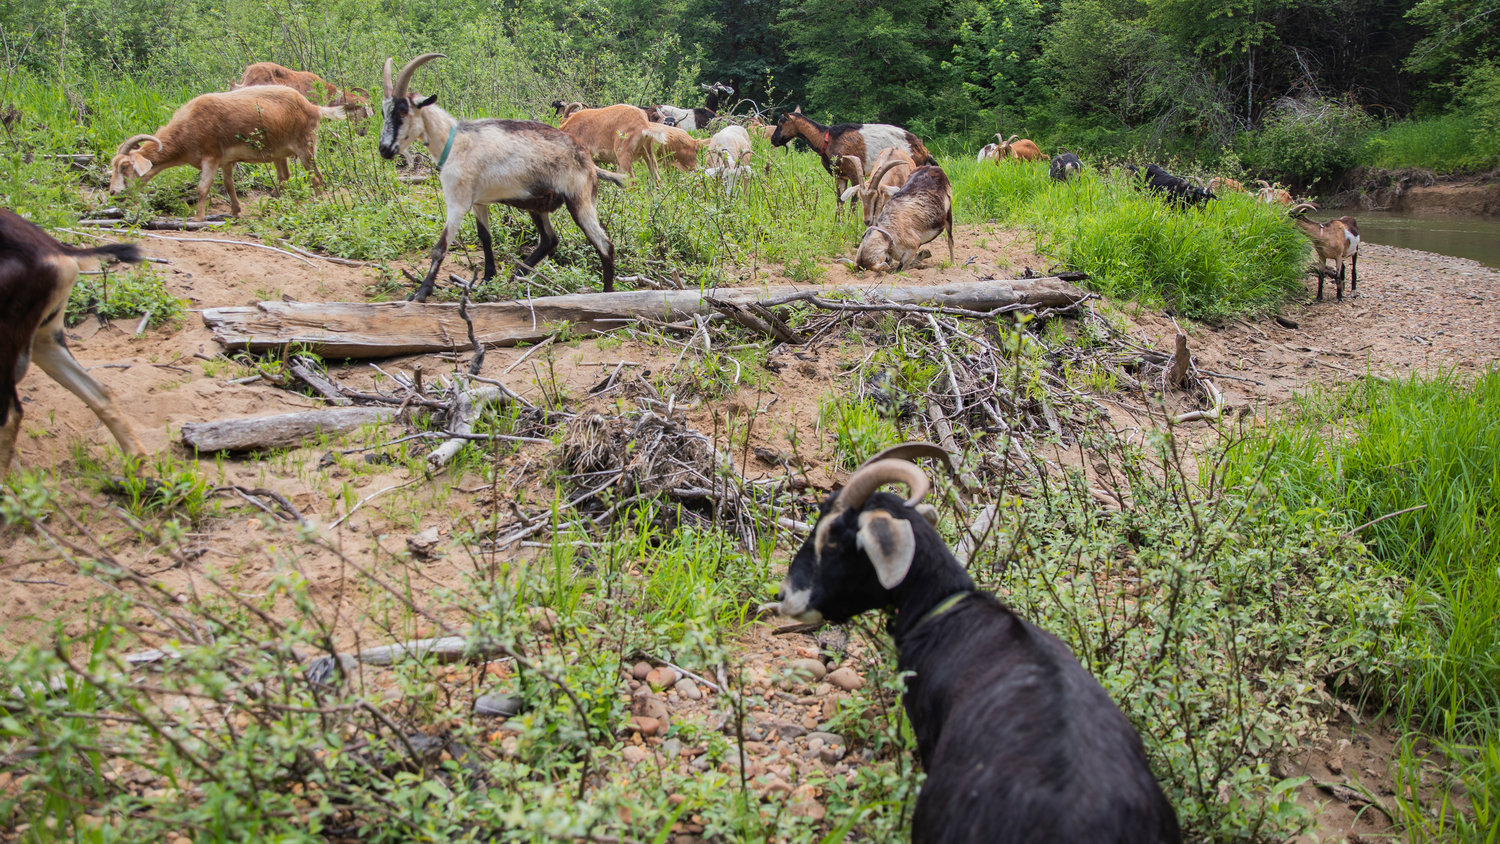 Goats play and graze on the bank of Salmon Creek near Toledo.